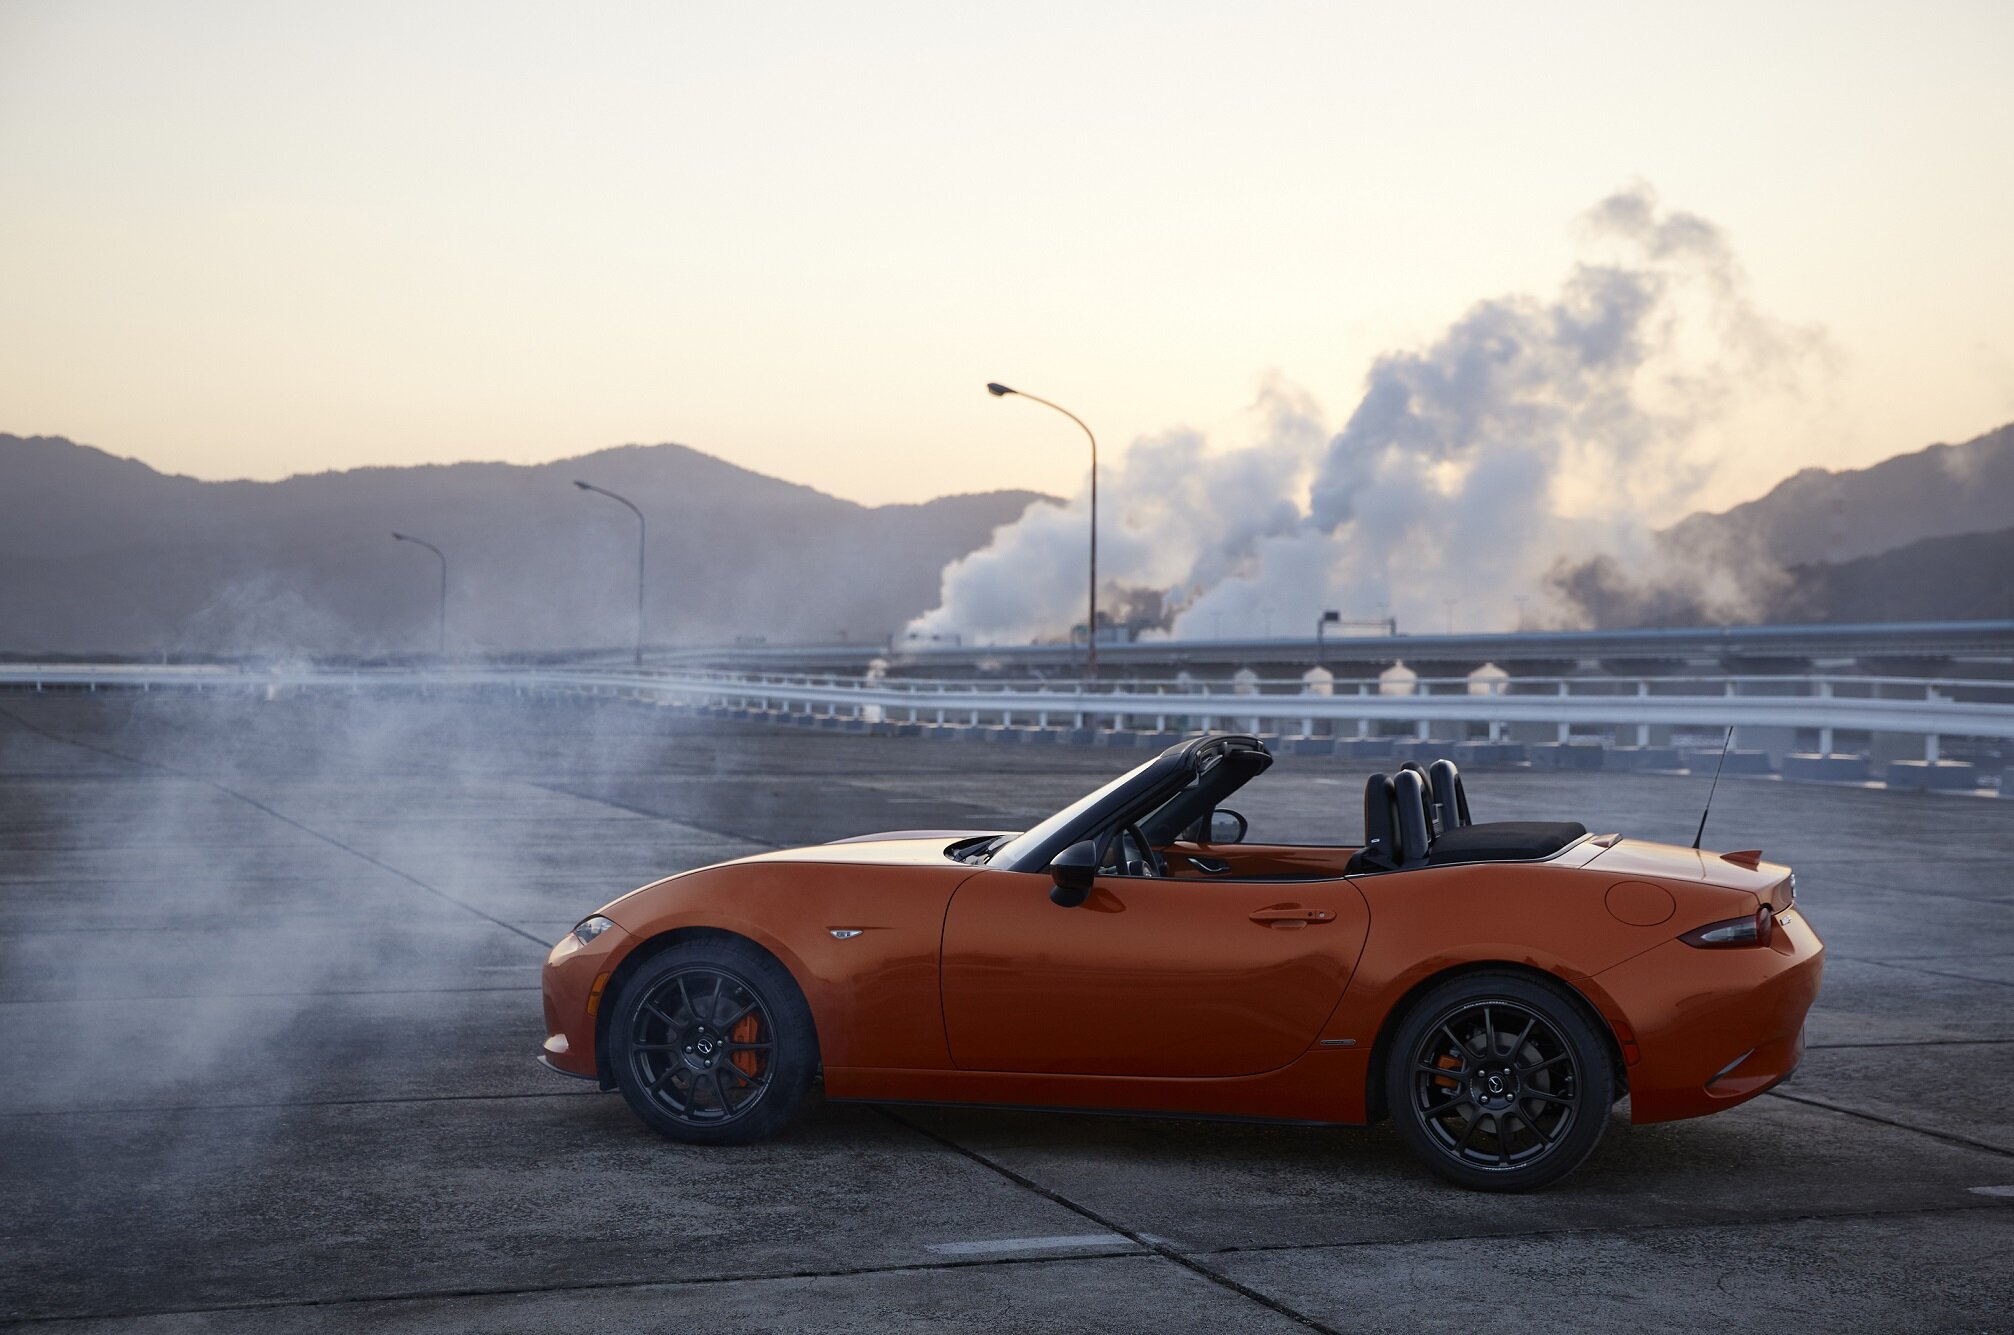 2019_MX-5_ROADSTER_SOFTTOP_19CY_30th_SV_US_LHD_C01_EXT_SIDE.jpg